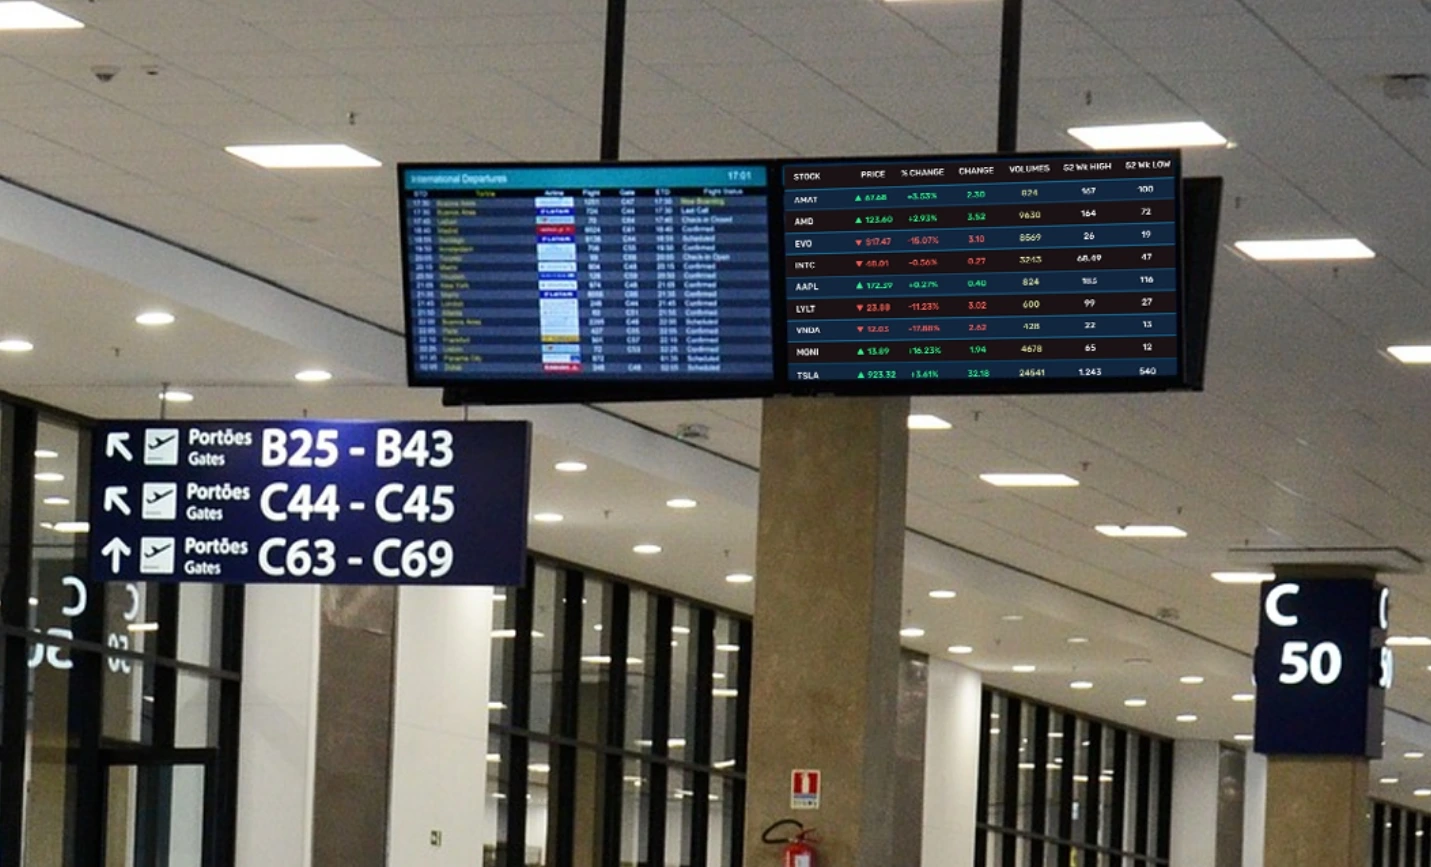 Digital signage screens in an Airport showing Stocks feed using Pickcel digital signage software